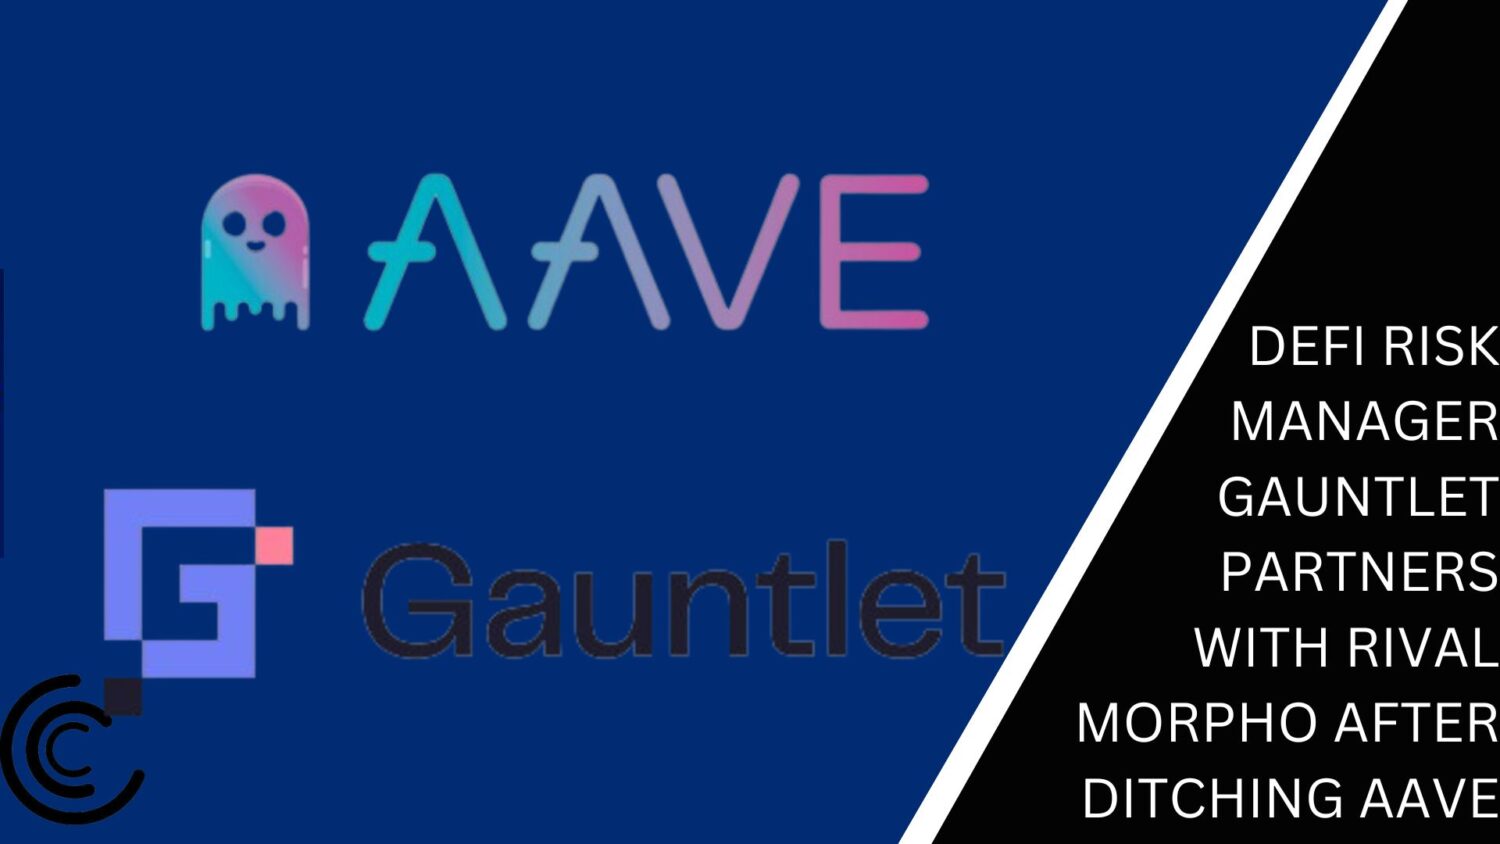 Risk Manager Gauntlet Partners With Rival Morpho After Ditching Aave